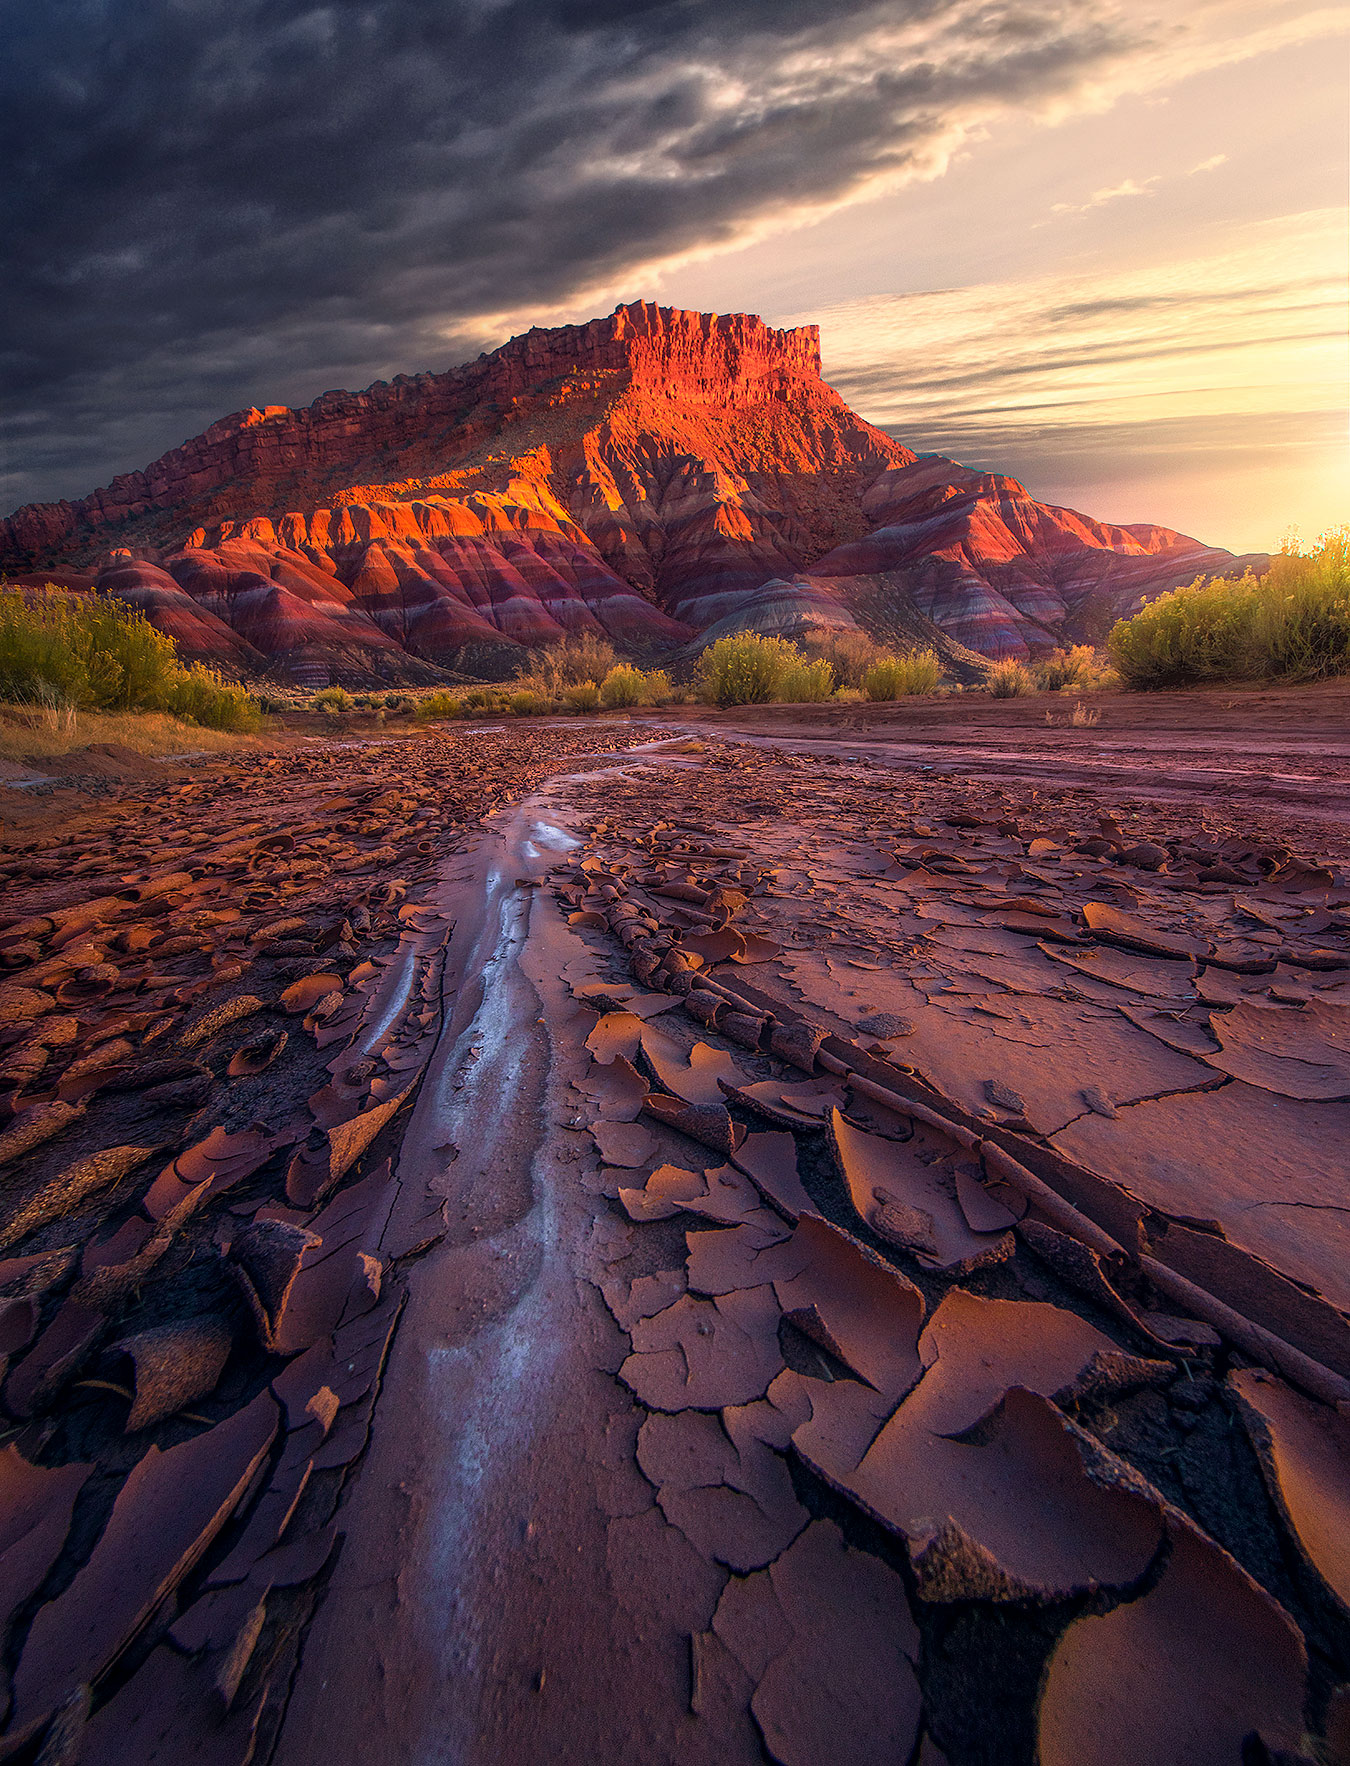 A salt-stained dried wash beneath colorful badlands in Arizona near sunset.